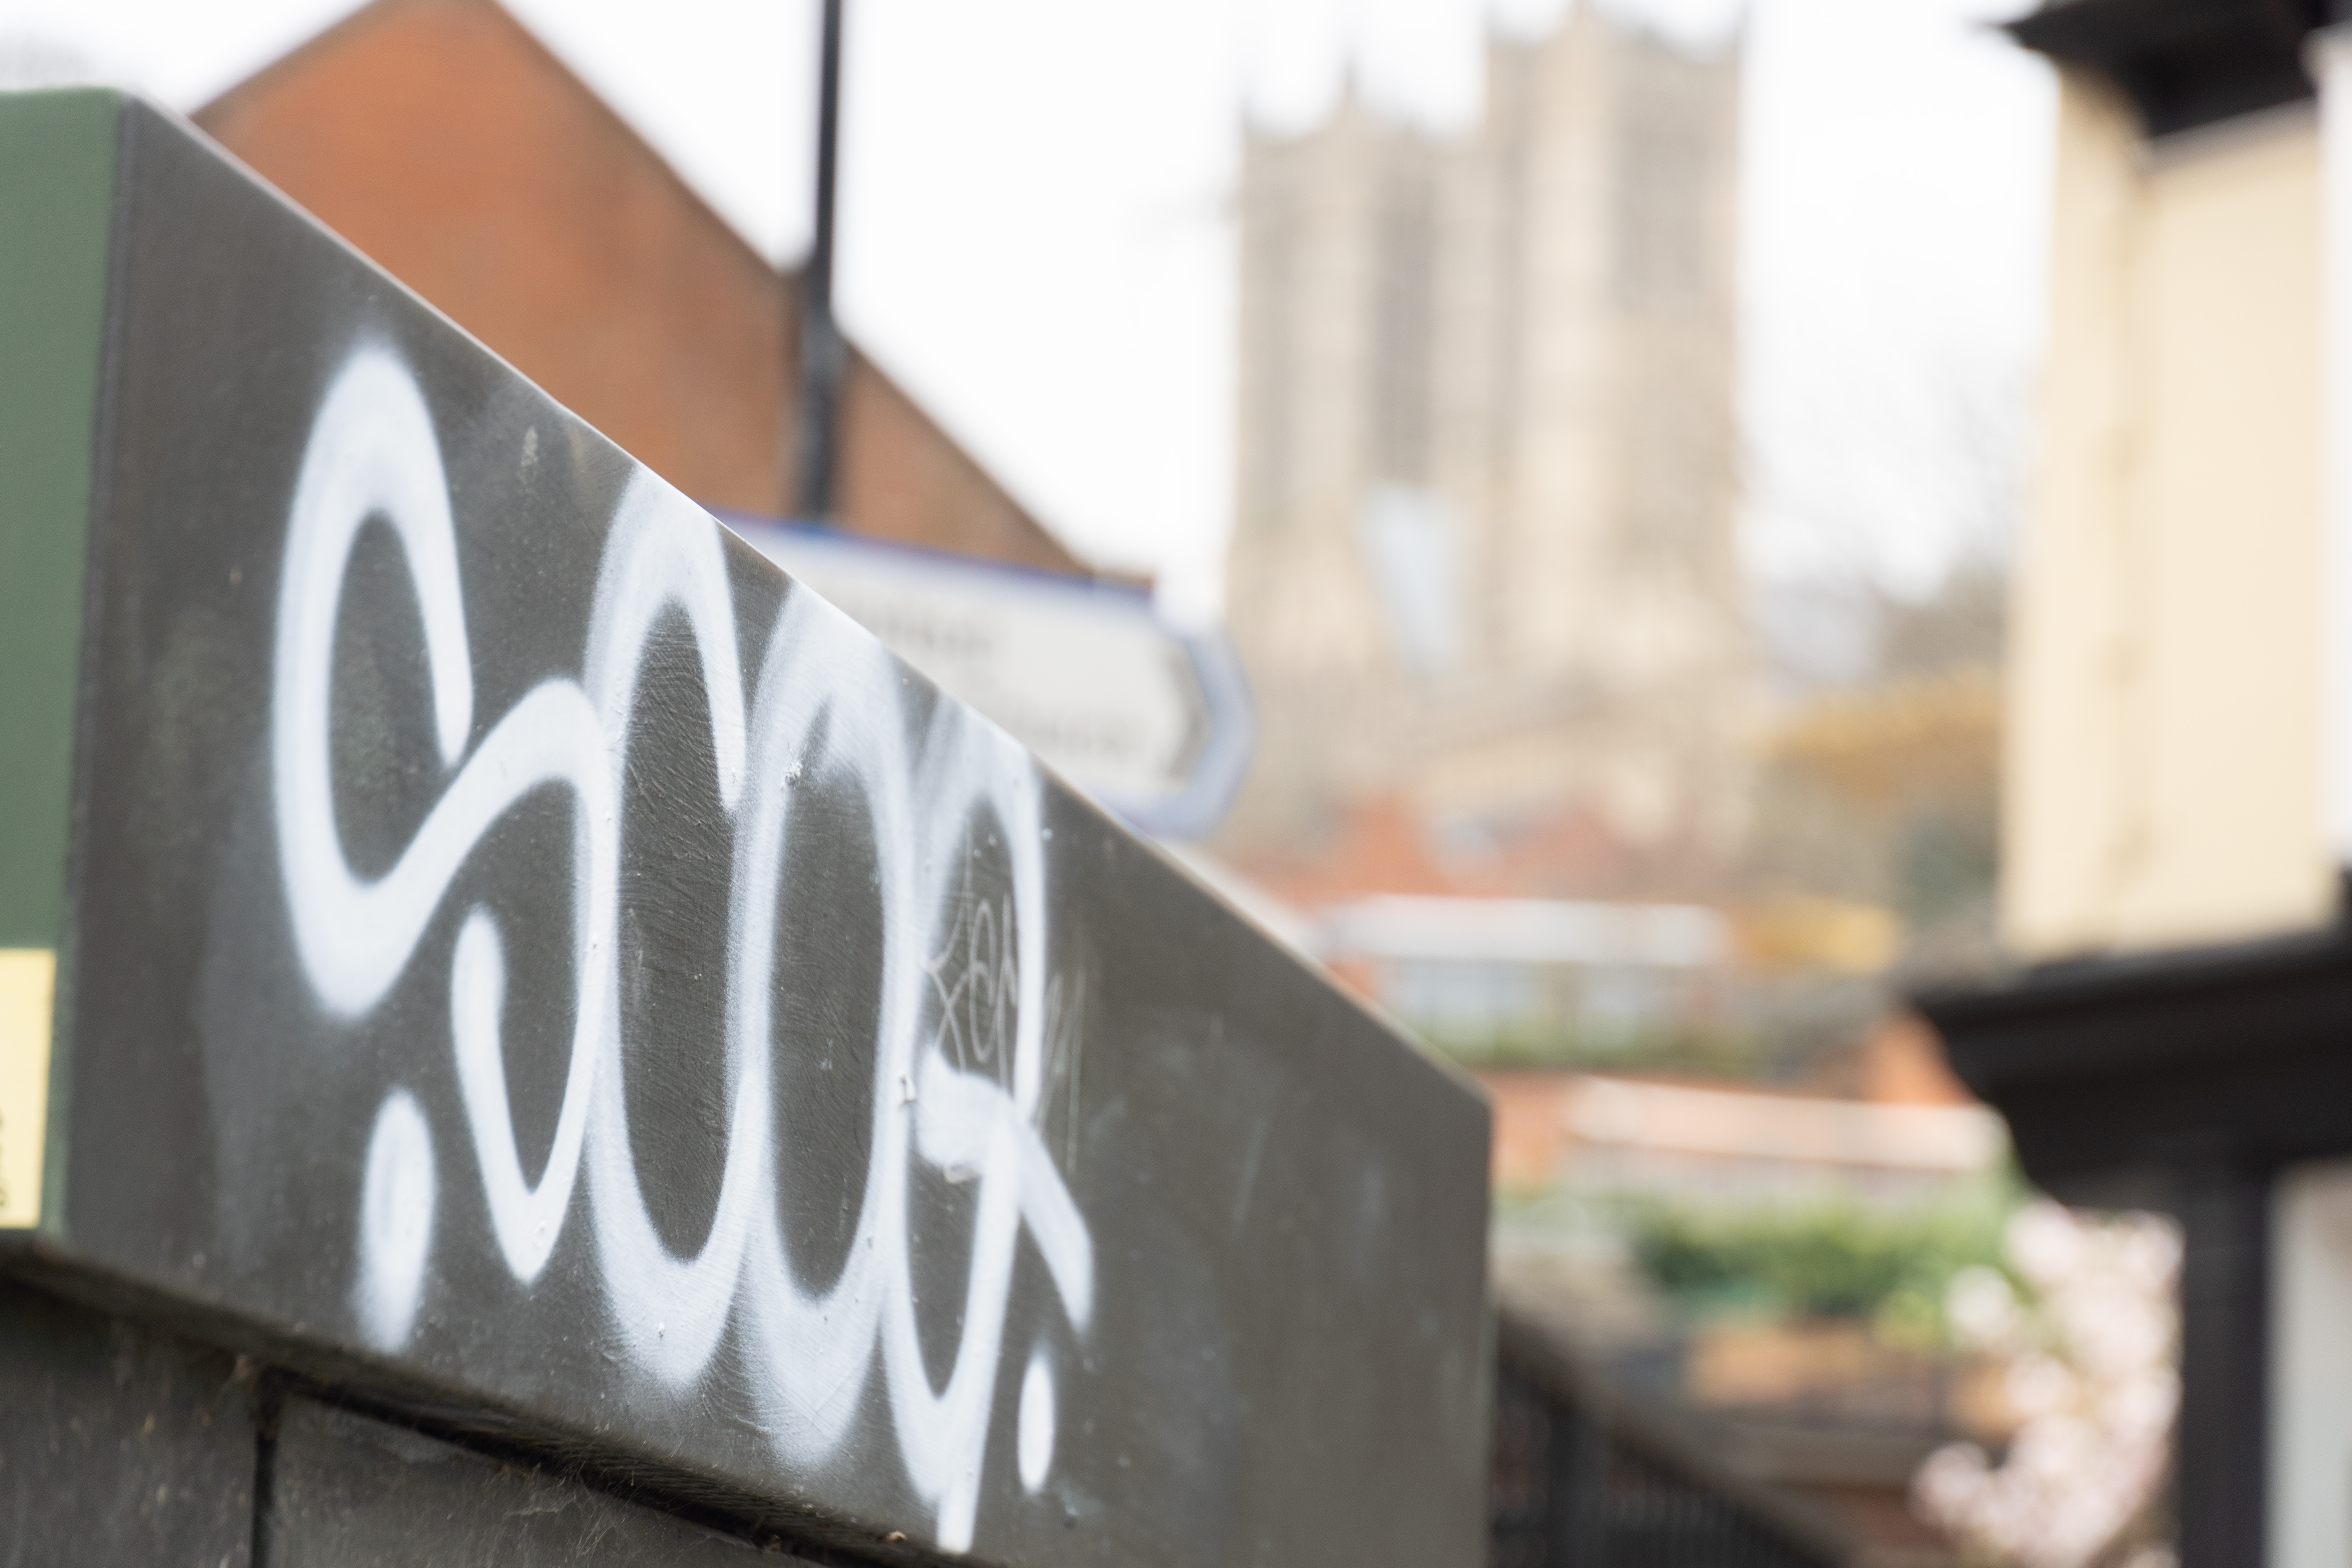 image shows graffiti on a wall with the cathedral in the background